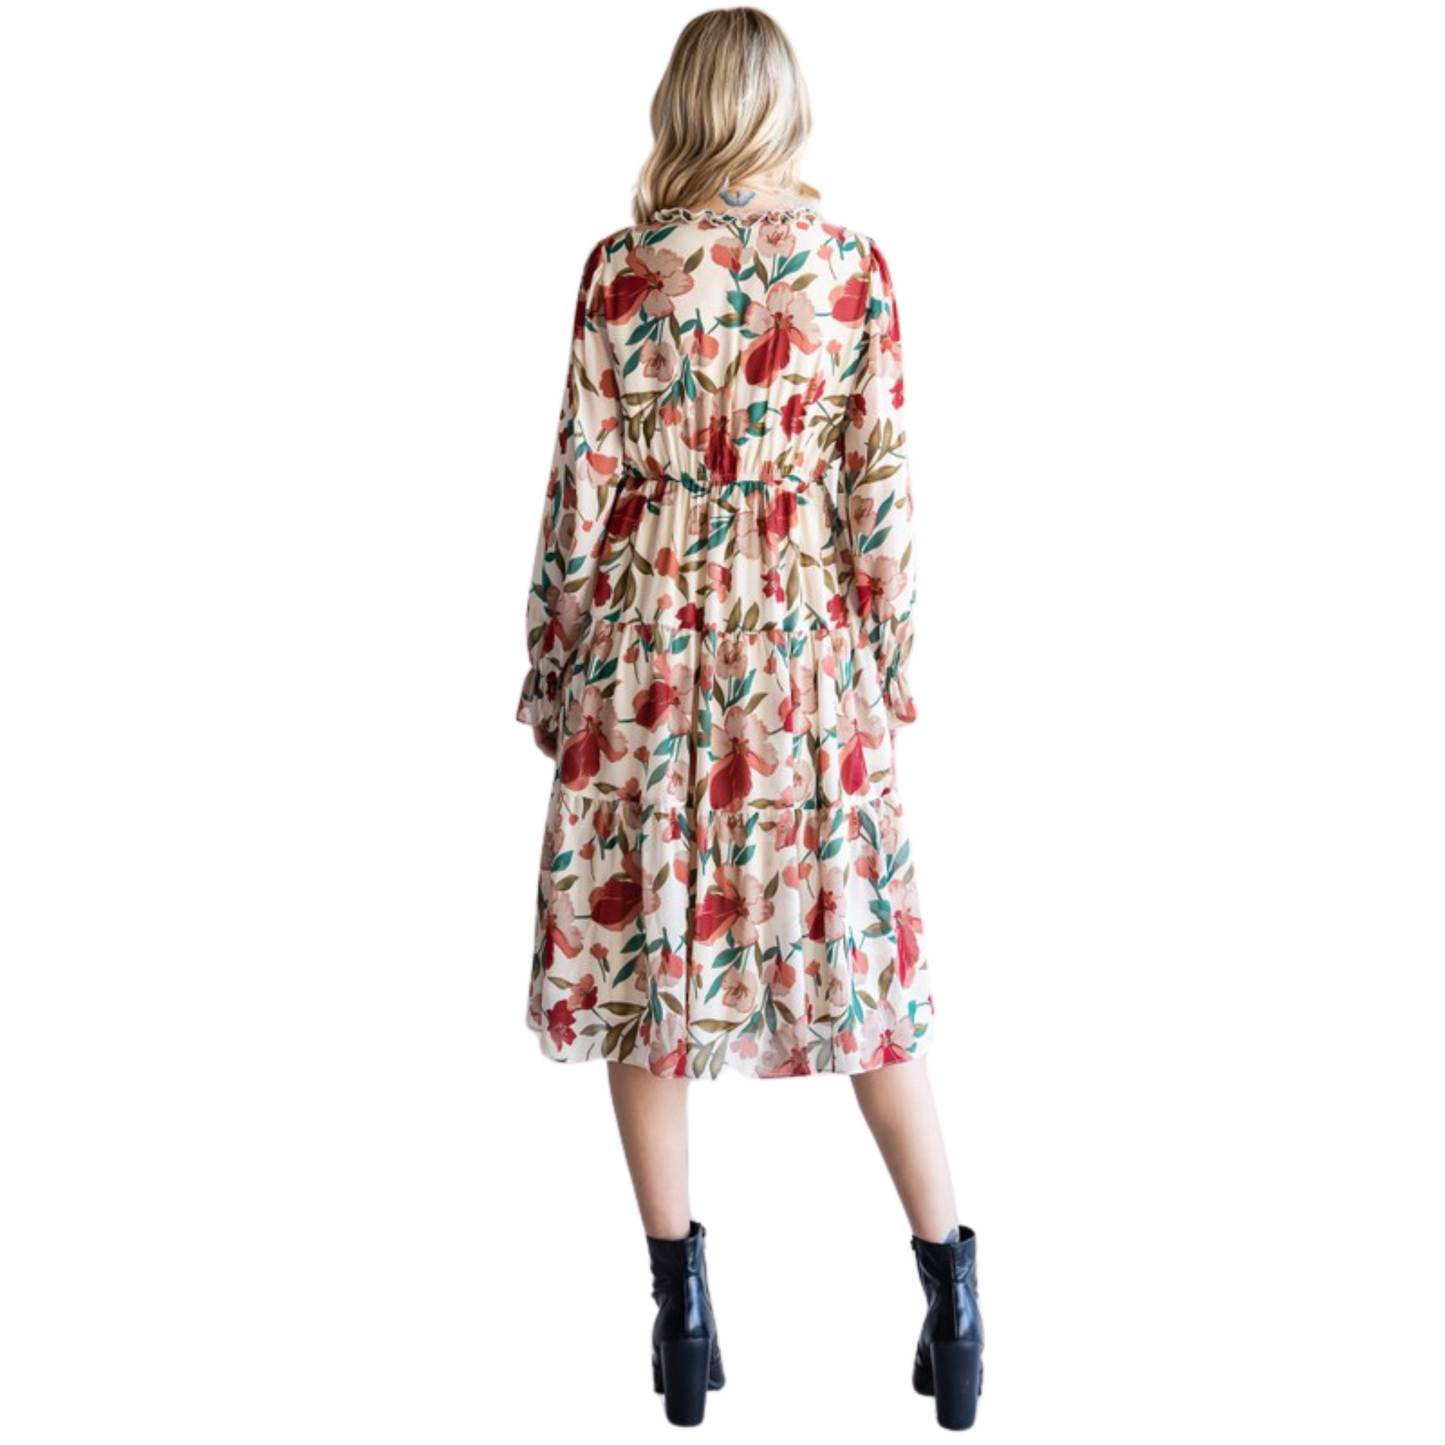 This Floral Print Chiffon Dress features a chic midi-length design with a V-neck and frilled detailing, long poet sleeves, and tiered layers. Crafted from lightweight chiffon, it is lined, non-sheer, and perfect for summer or a beach vacation.